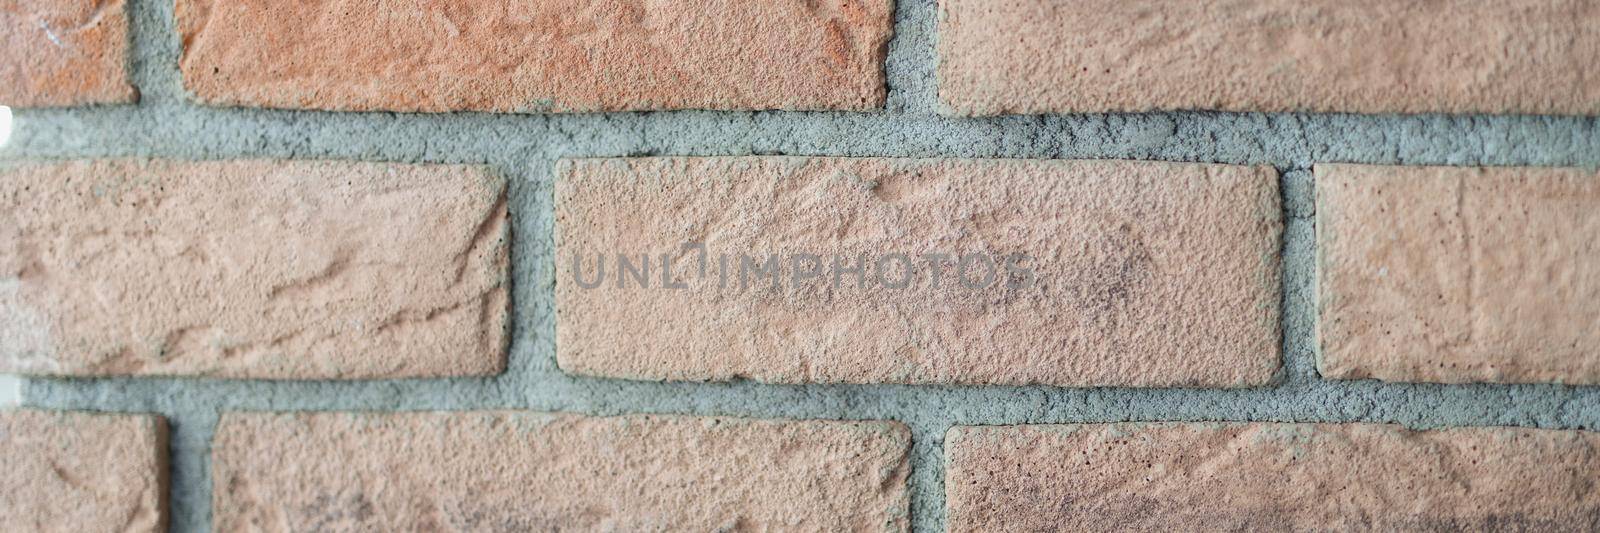 Red brick wall in the interior, rough texture, close-up. Design element, old brickwork with cement. Orange exterior facade